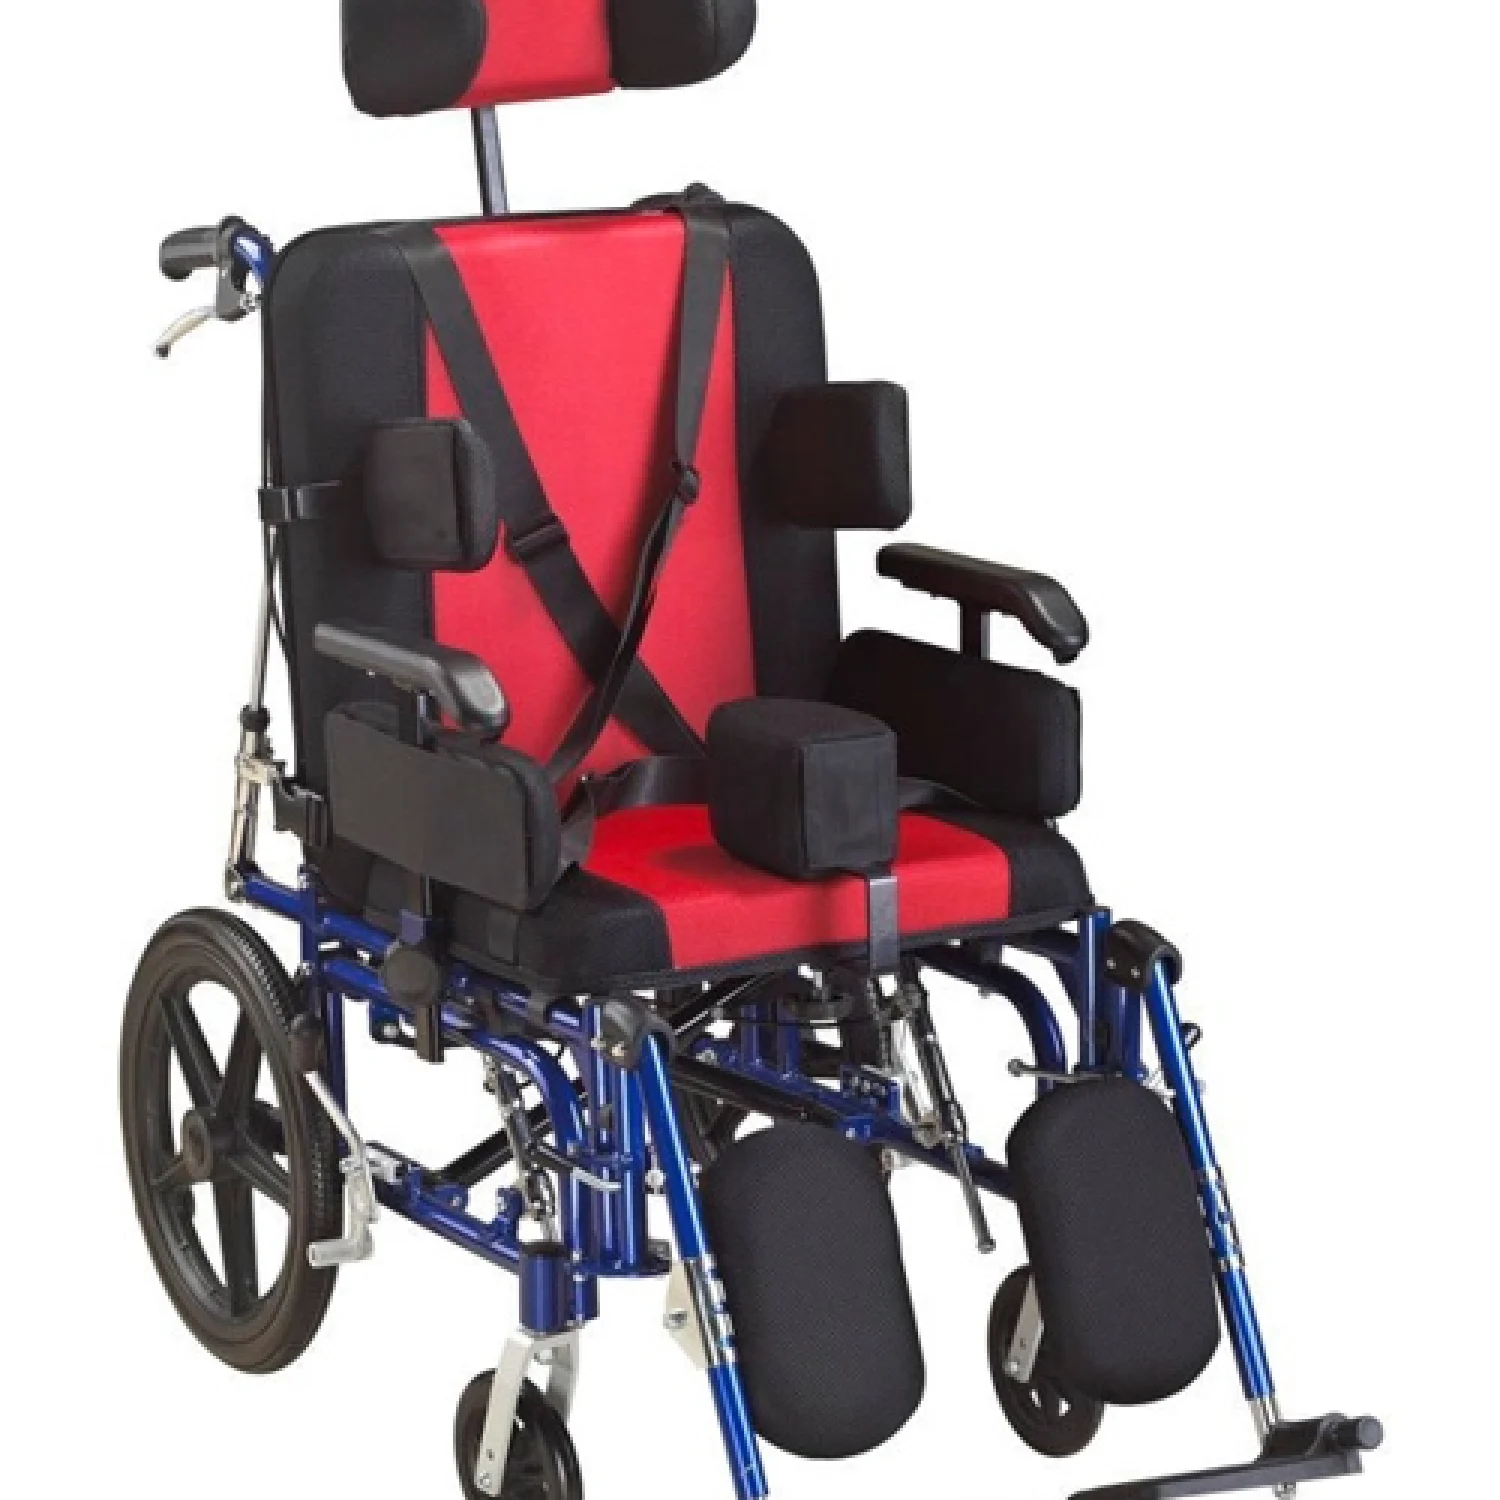 Disabled-Lightweight-Manual-Cp-Wheelchairs-for-Cerebral-Palsy-Children